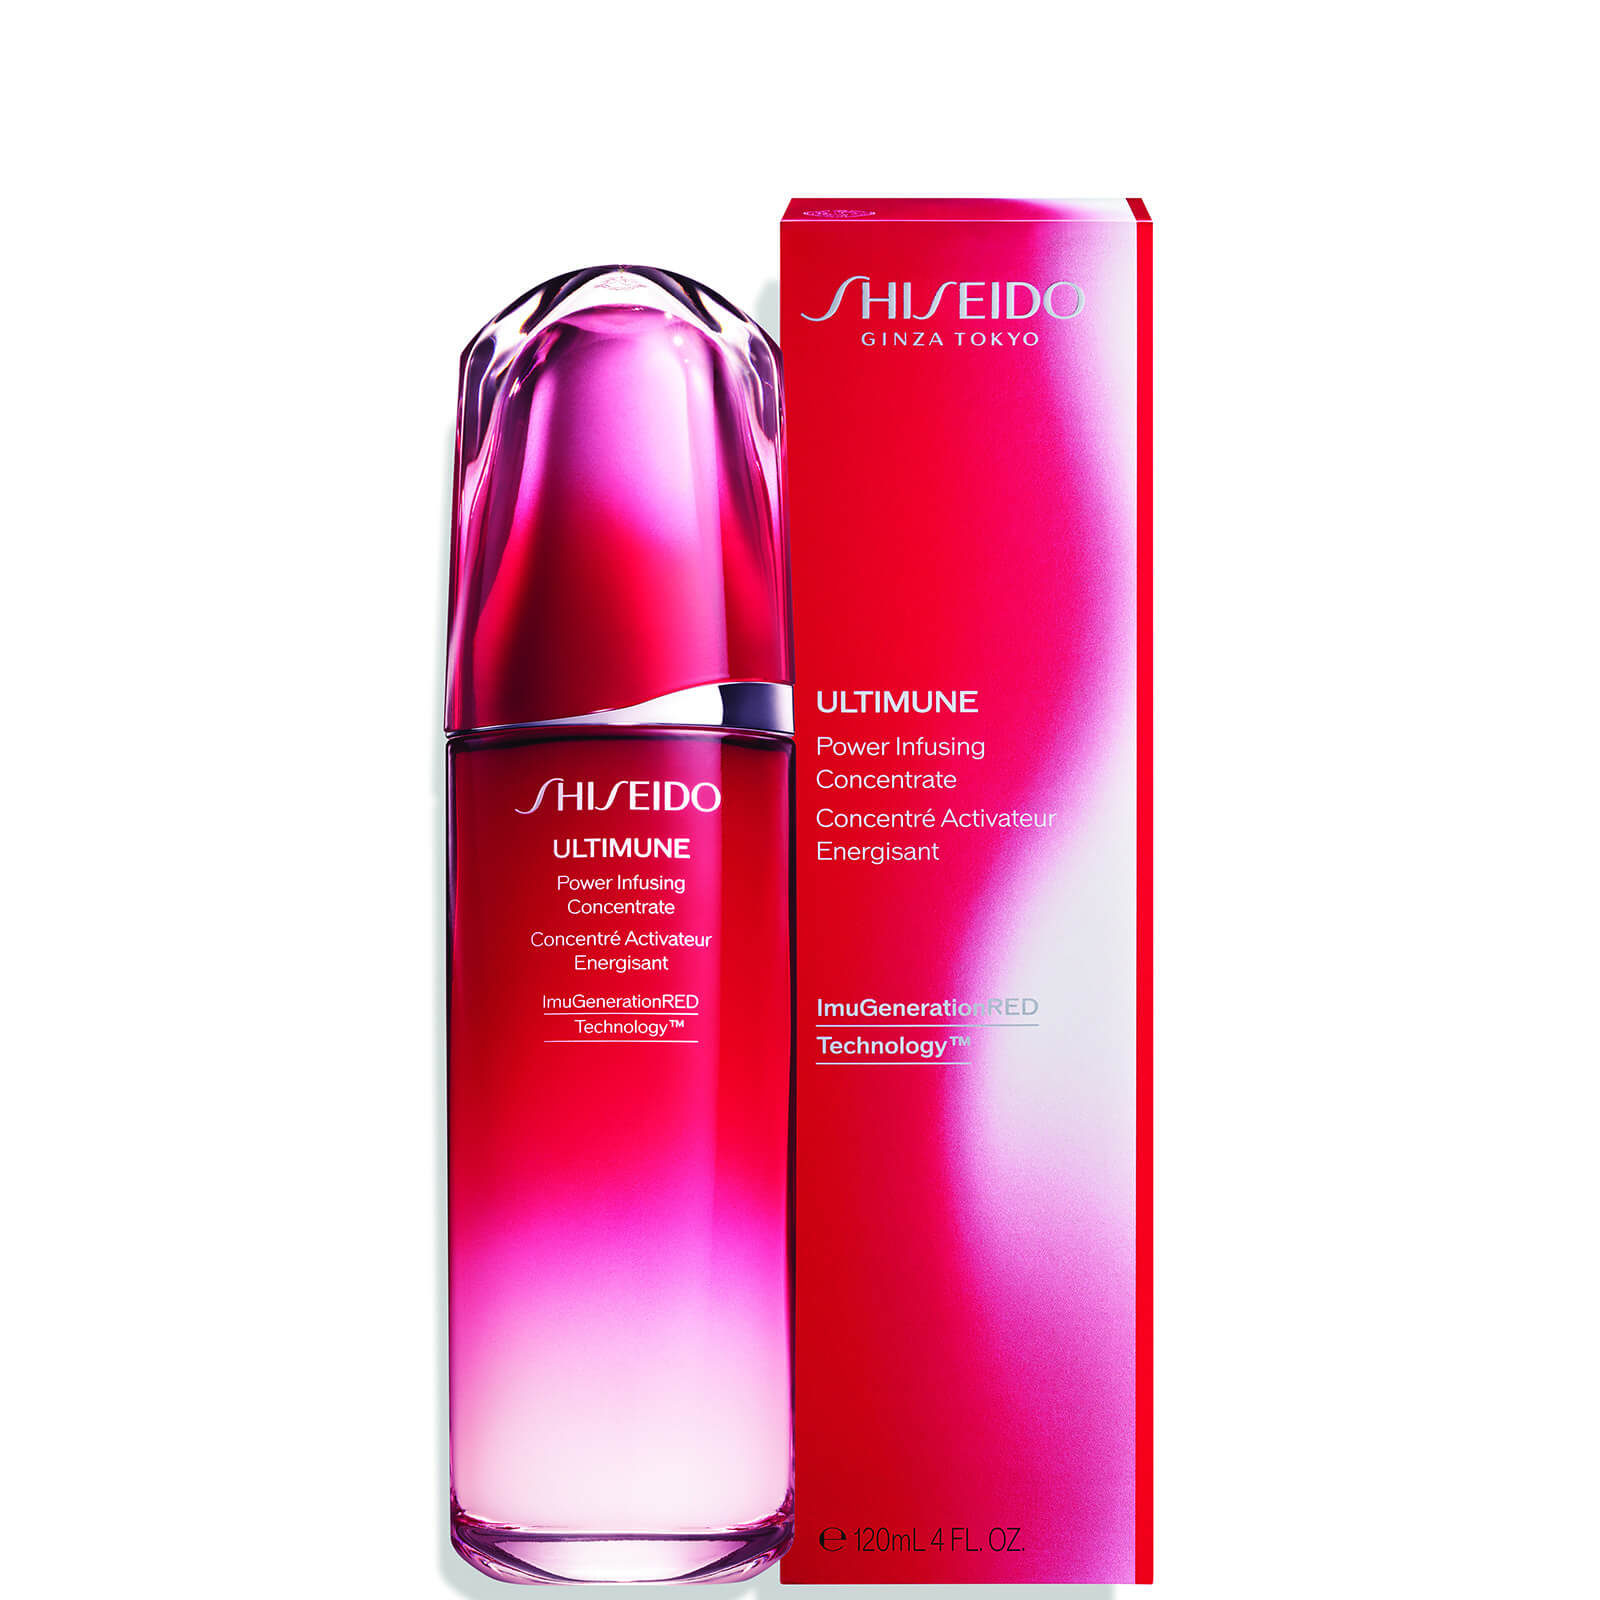 Photos - Cream / Lotion Shiseido Ultimune Power Infusing Concentrate Limited Edition (Various Size 